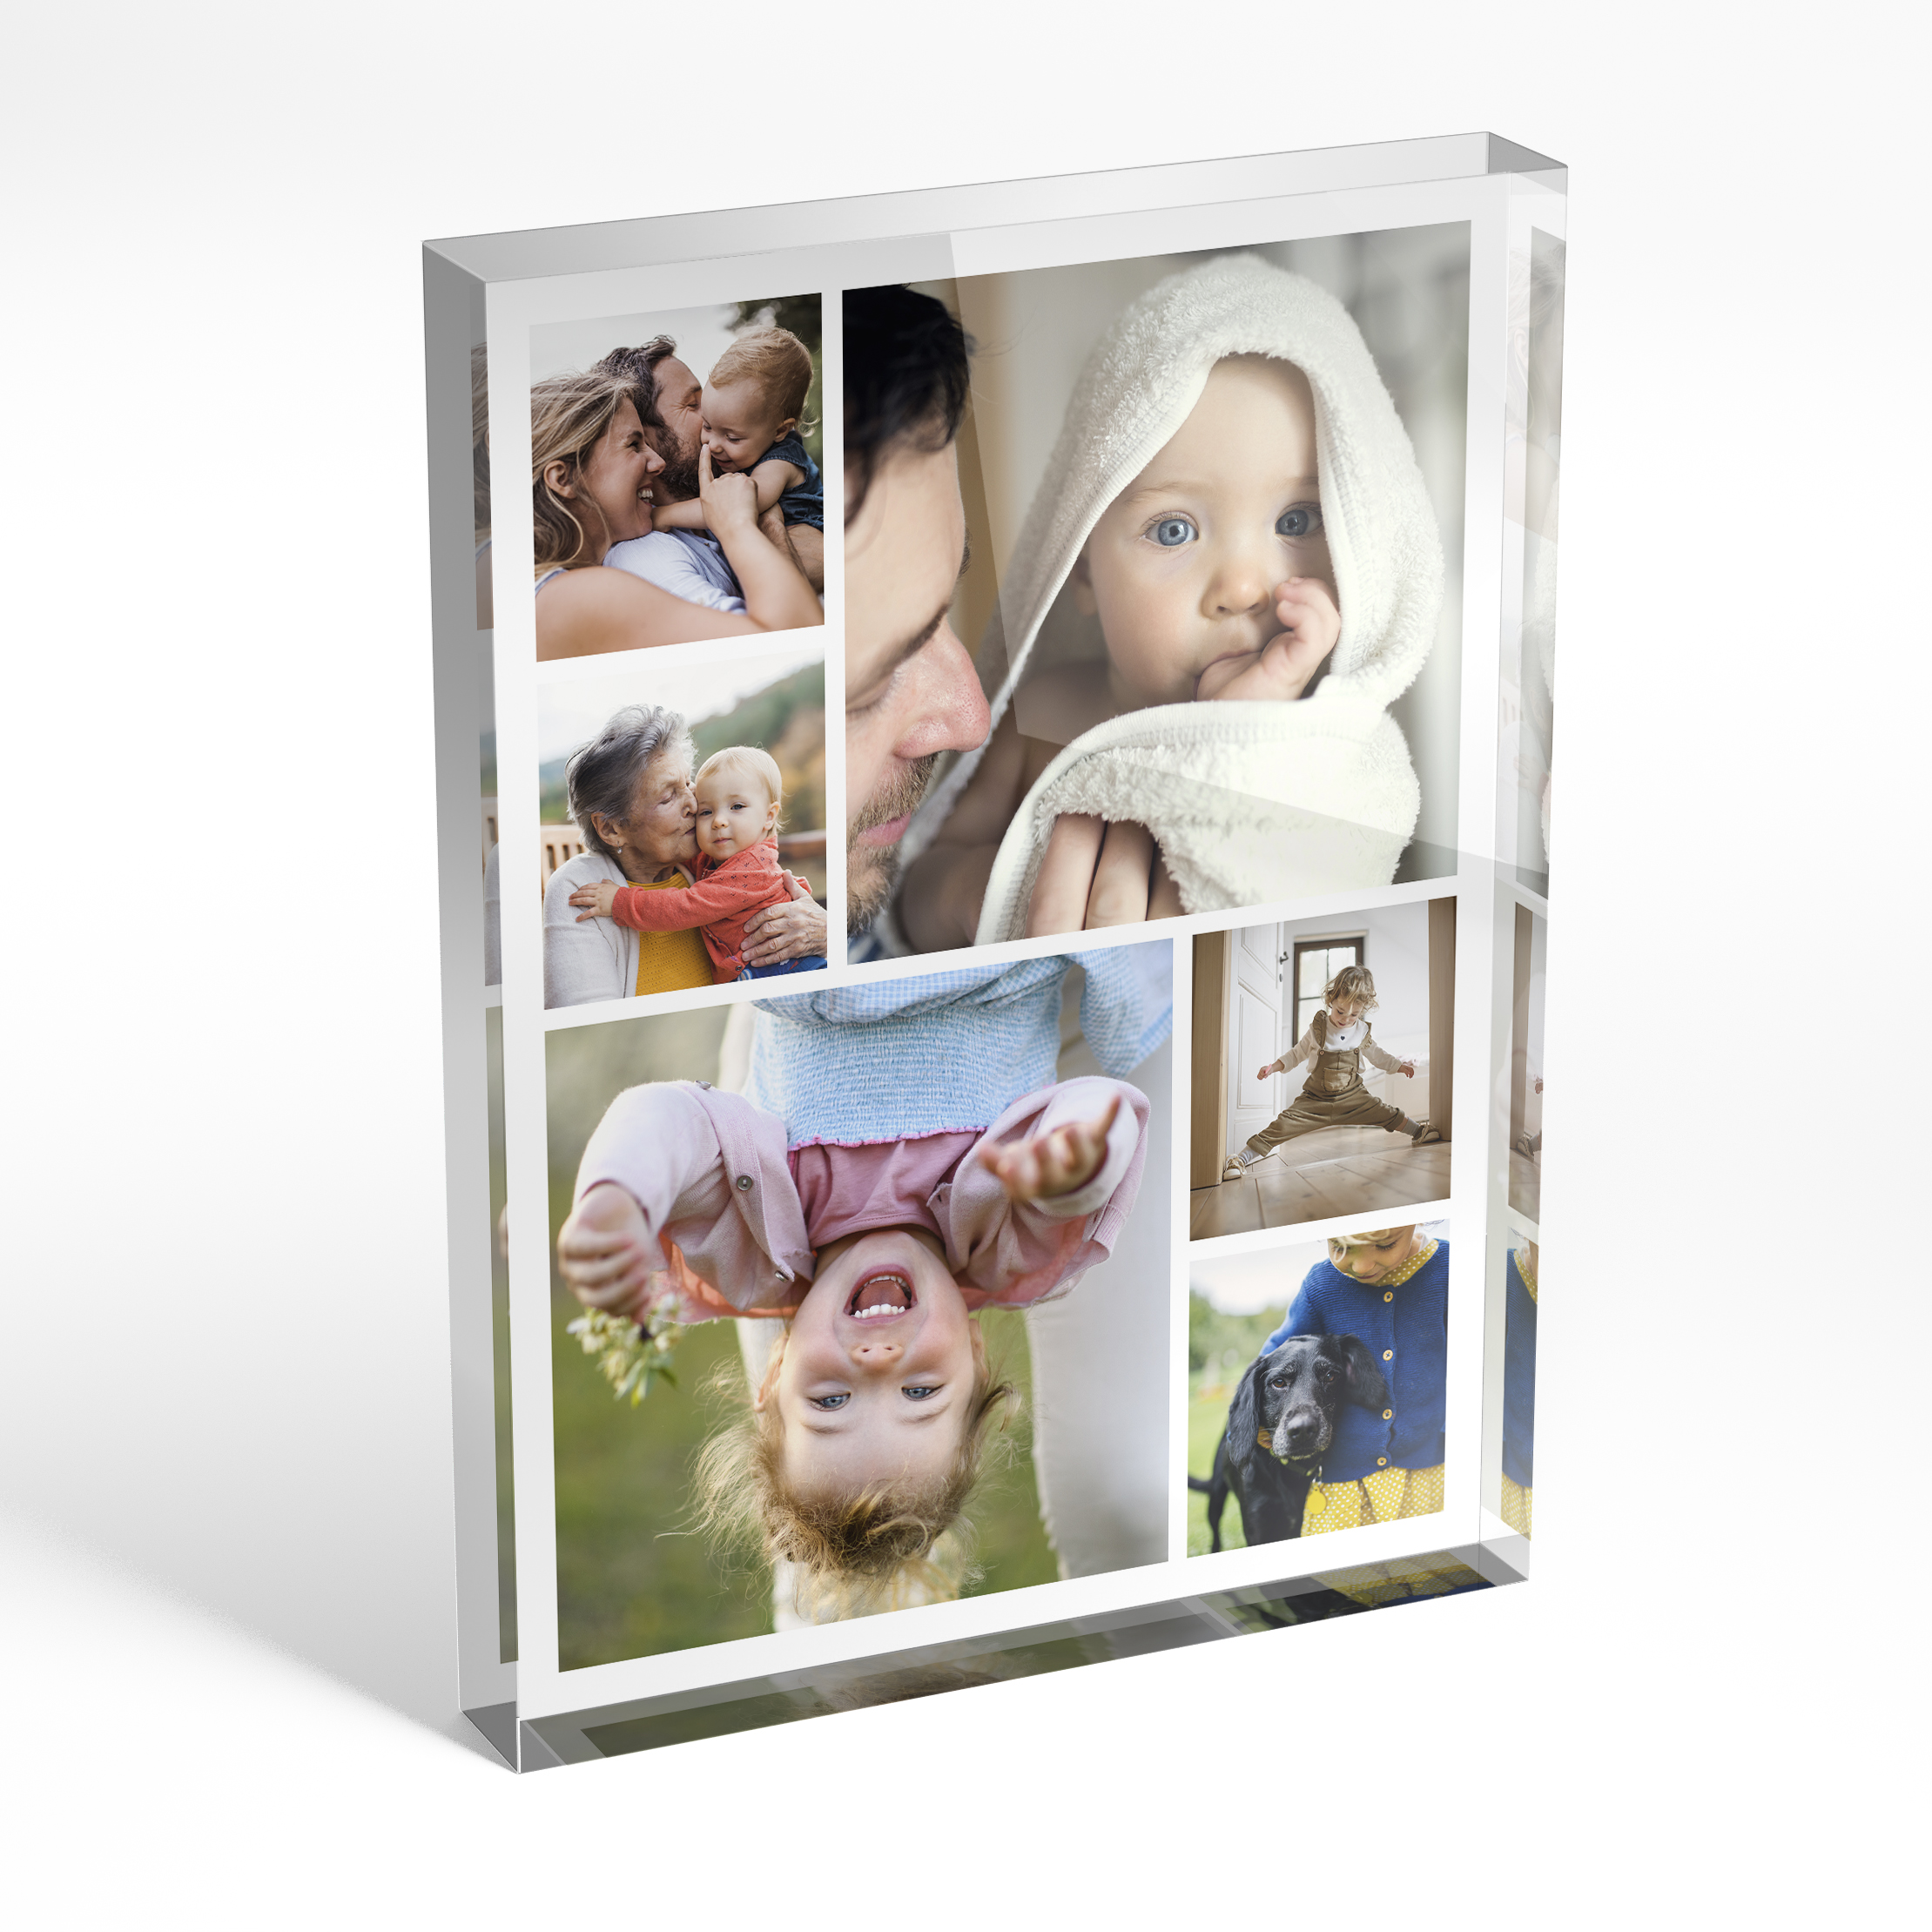 An angled side view of a portrait layout Acrylic Photo Block with space for 6 photos. Thiis design is named "Kaleidoscope Memories". 